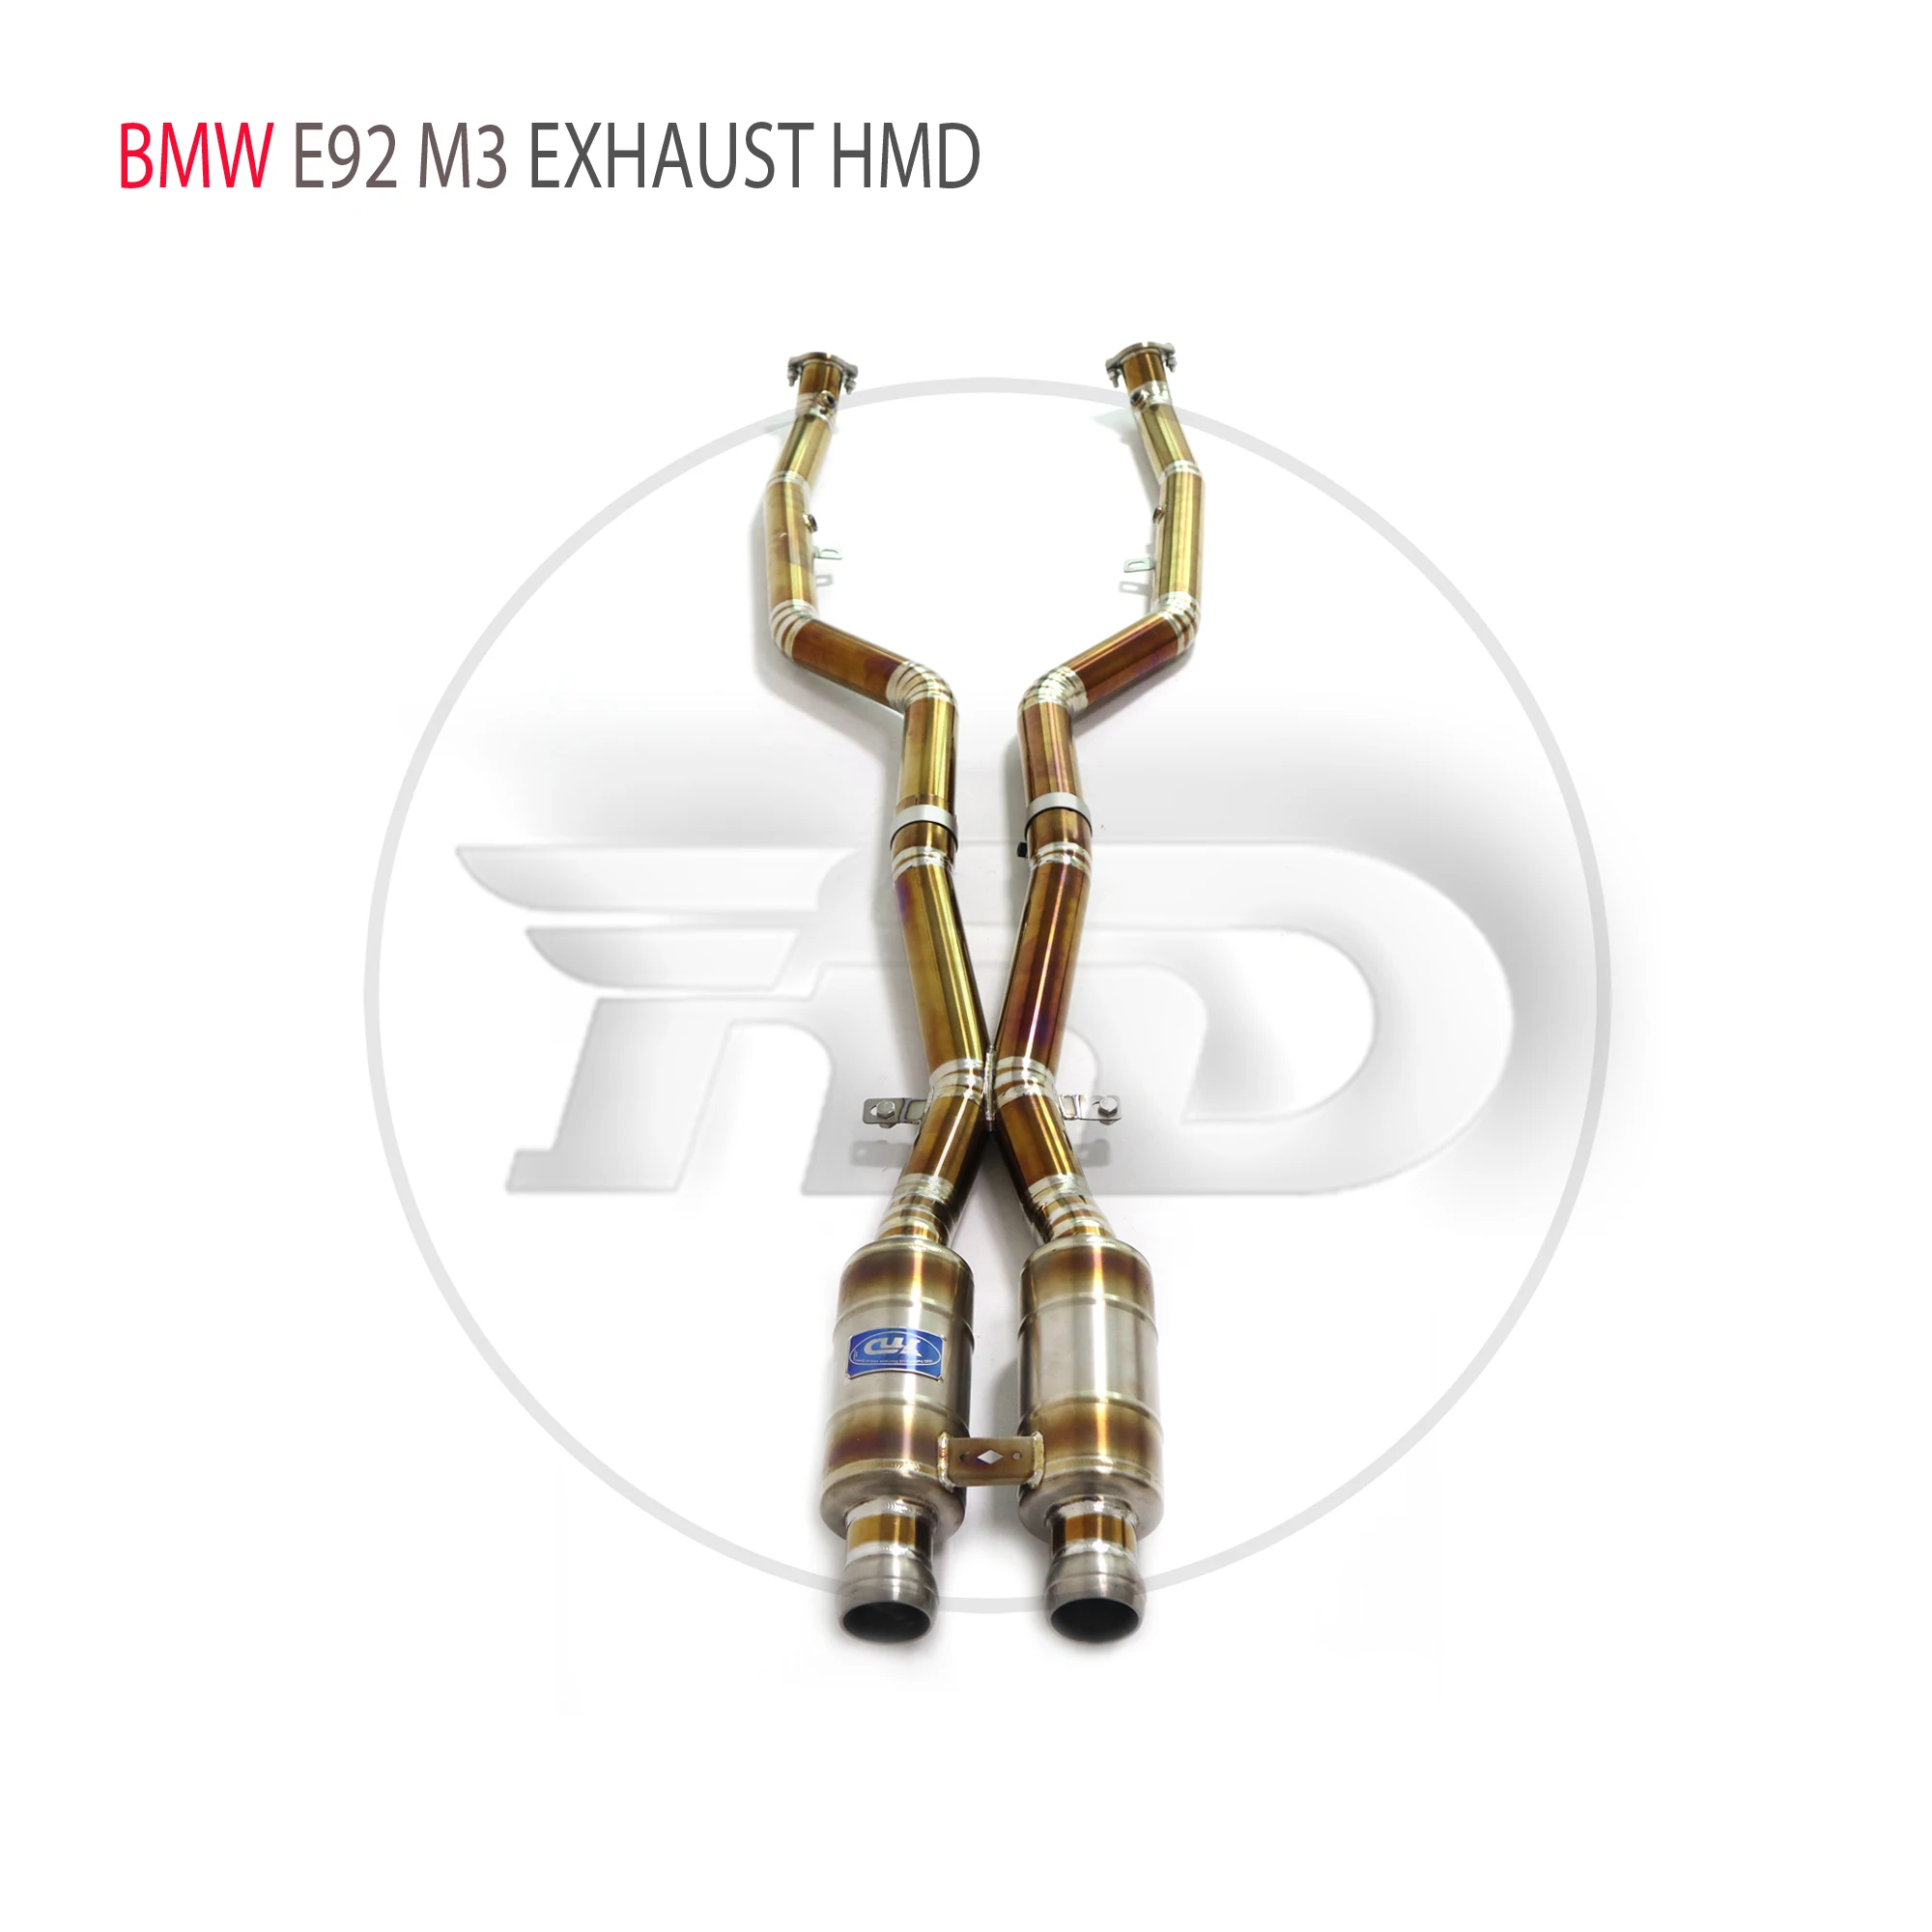 

HMD Titanium Alloy Exhaust System Performance Middle Pipe For BMW E92 M3 Car Resonator Racing Pipe